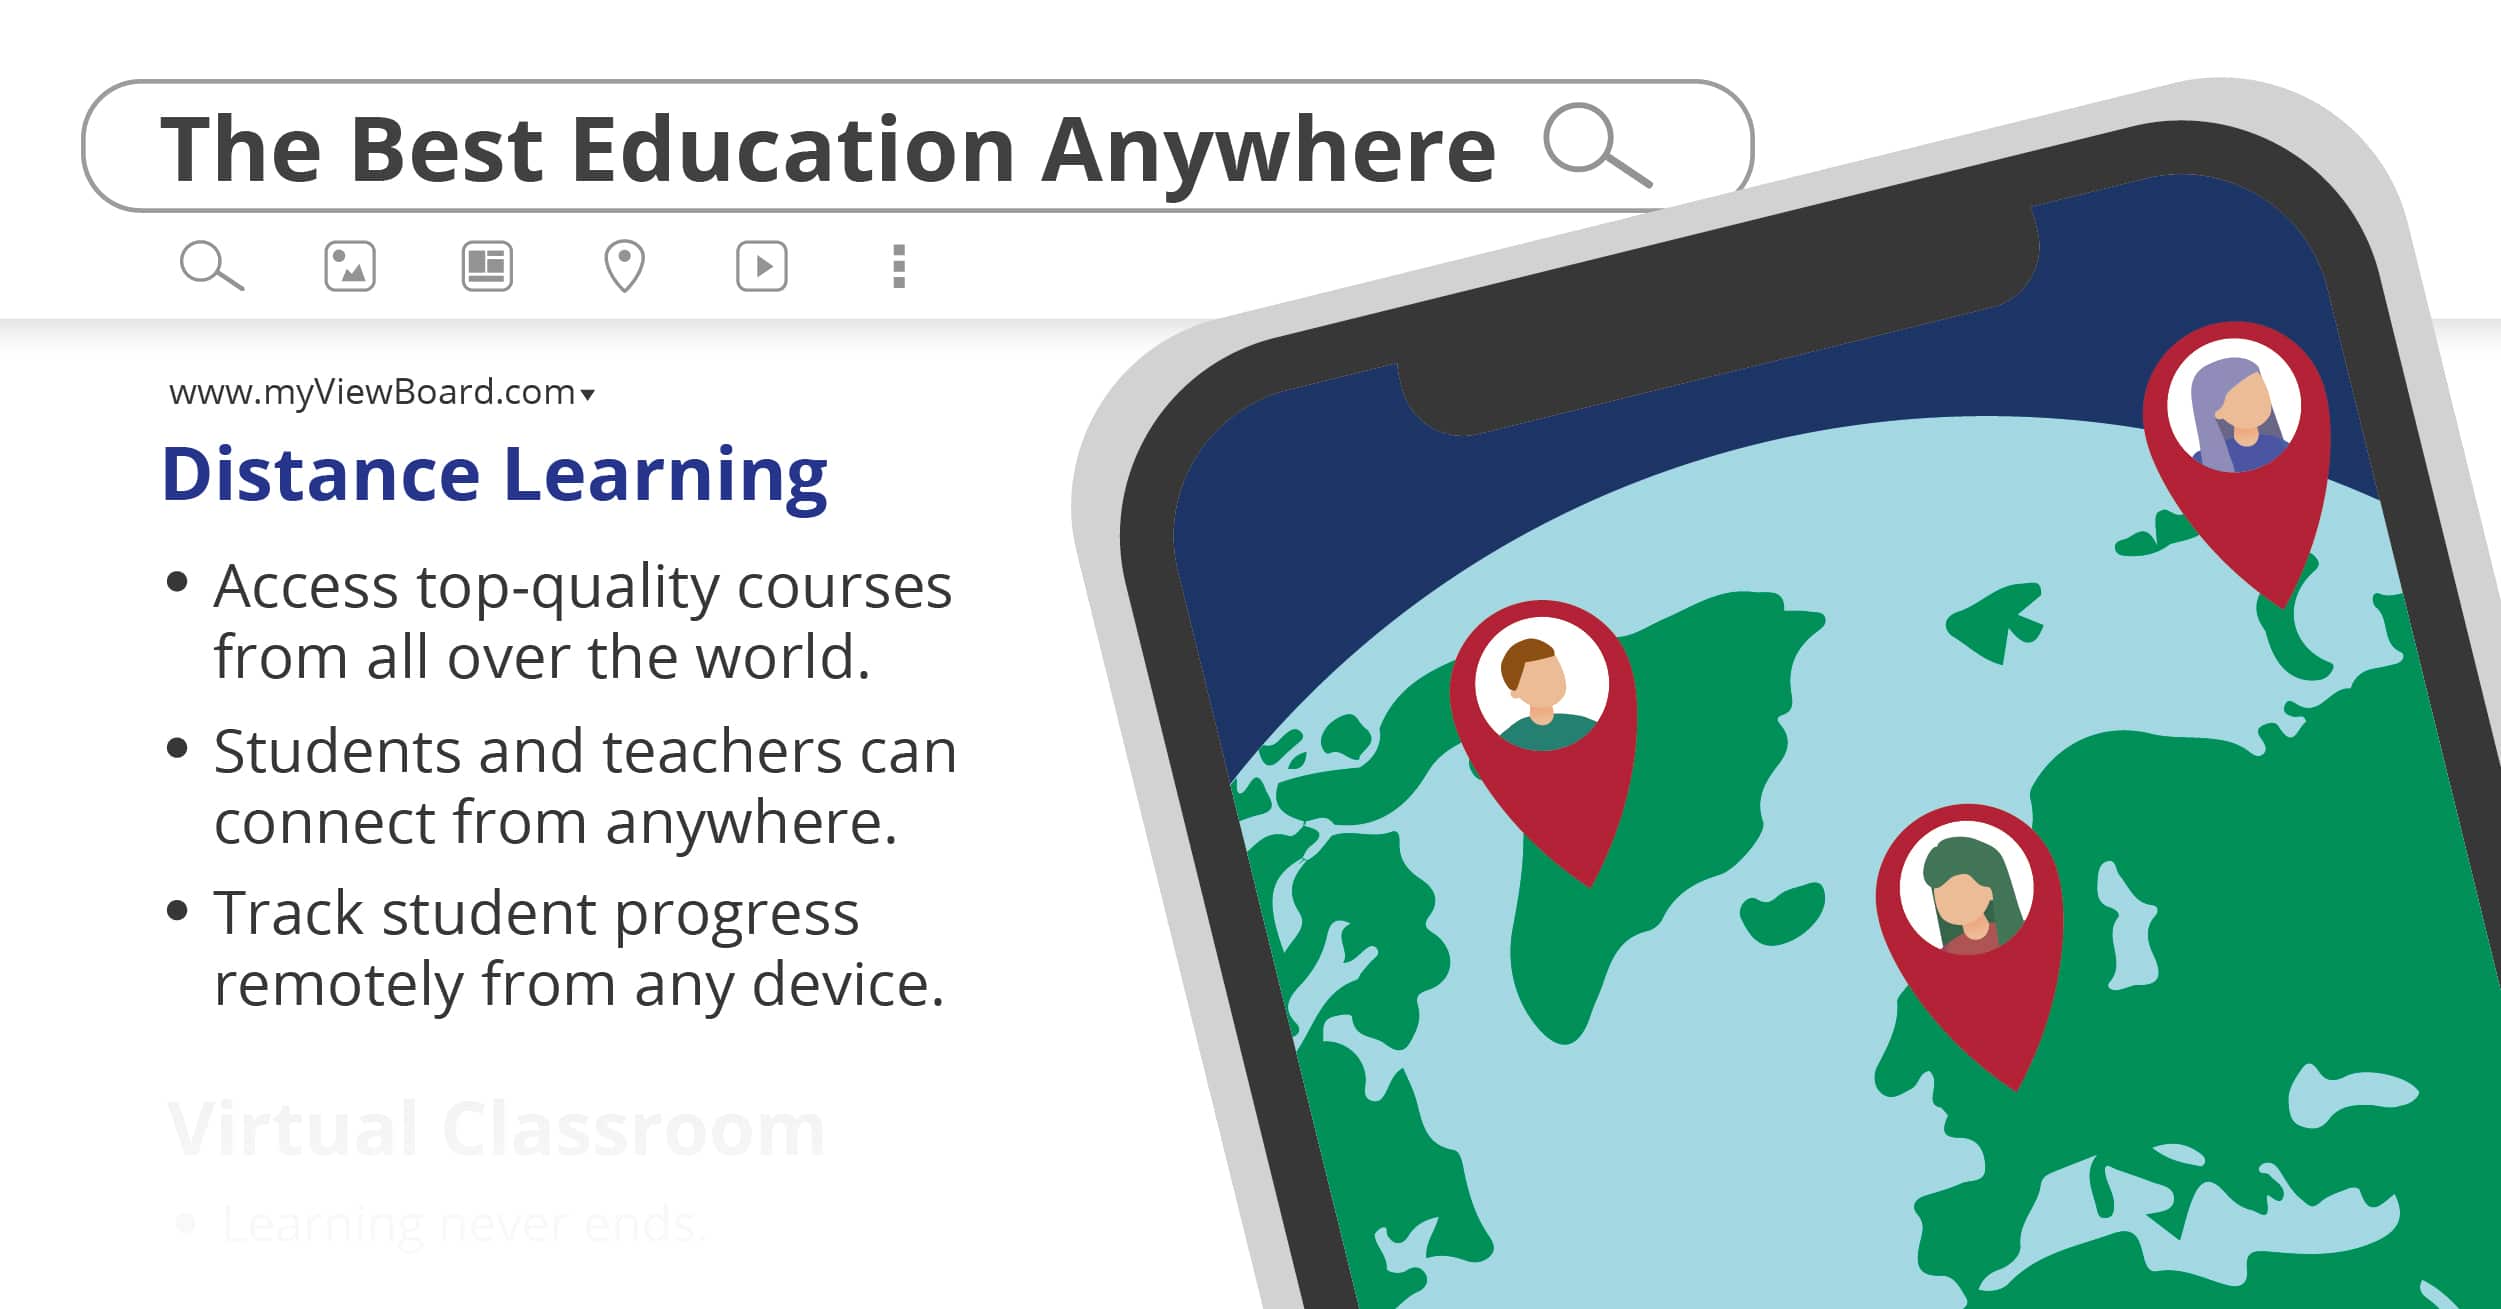 What is Distance Learning?